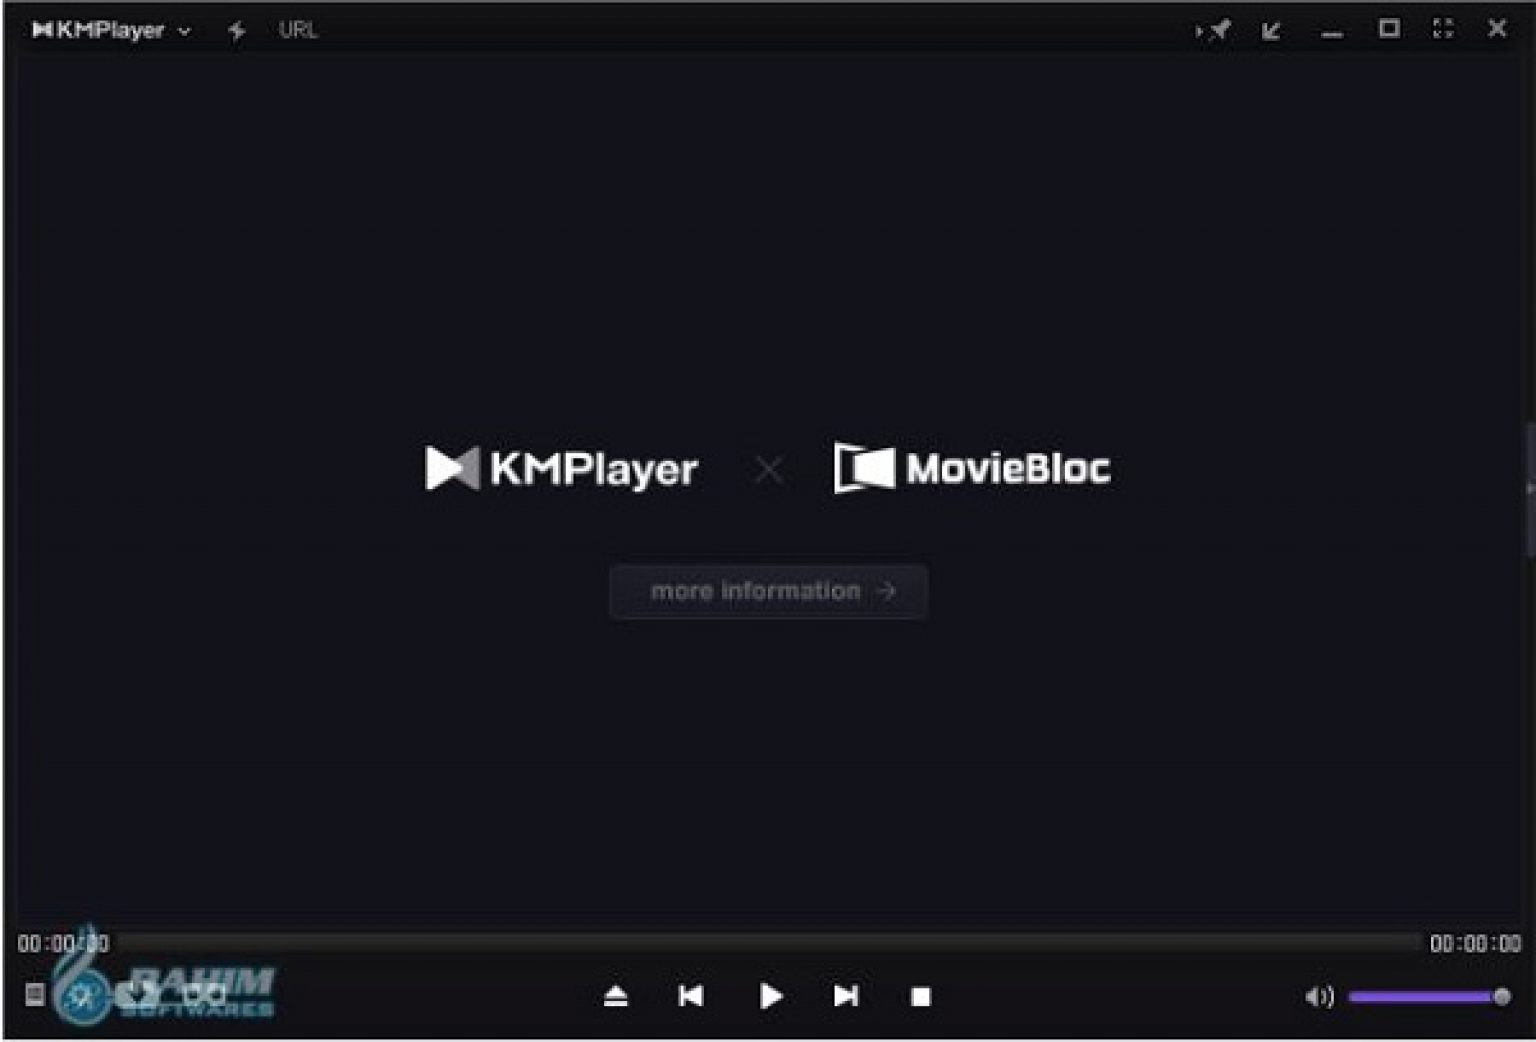 where the kmplayer save downloaded subtitles